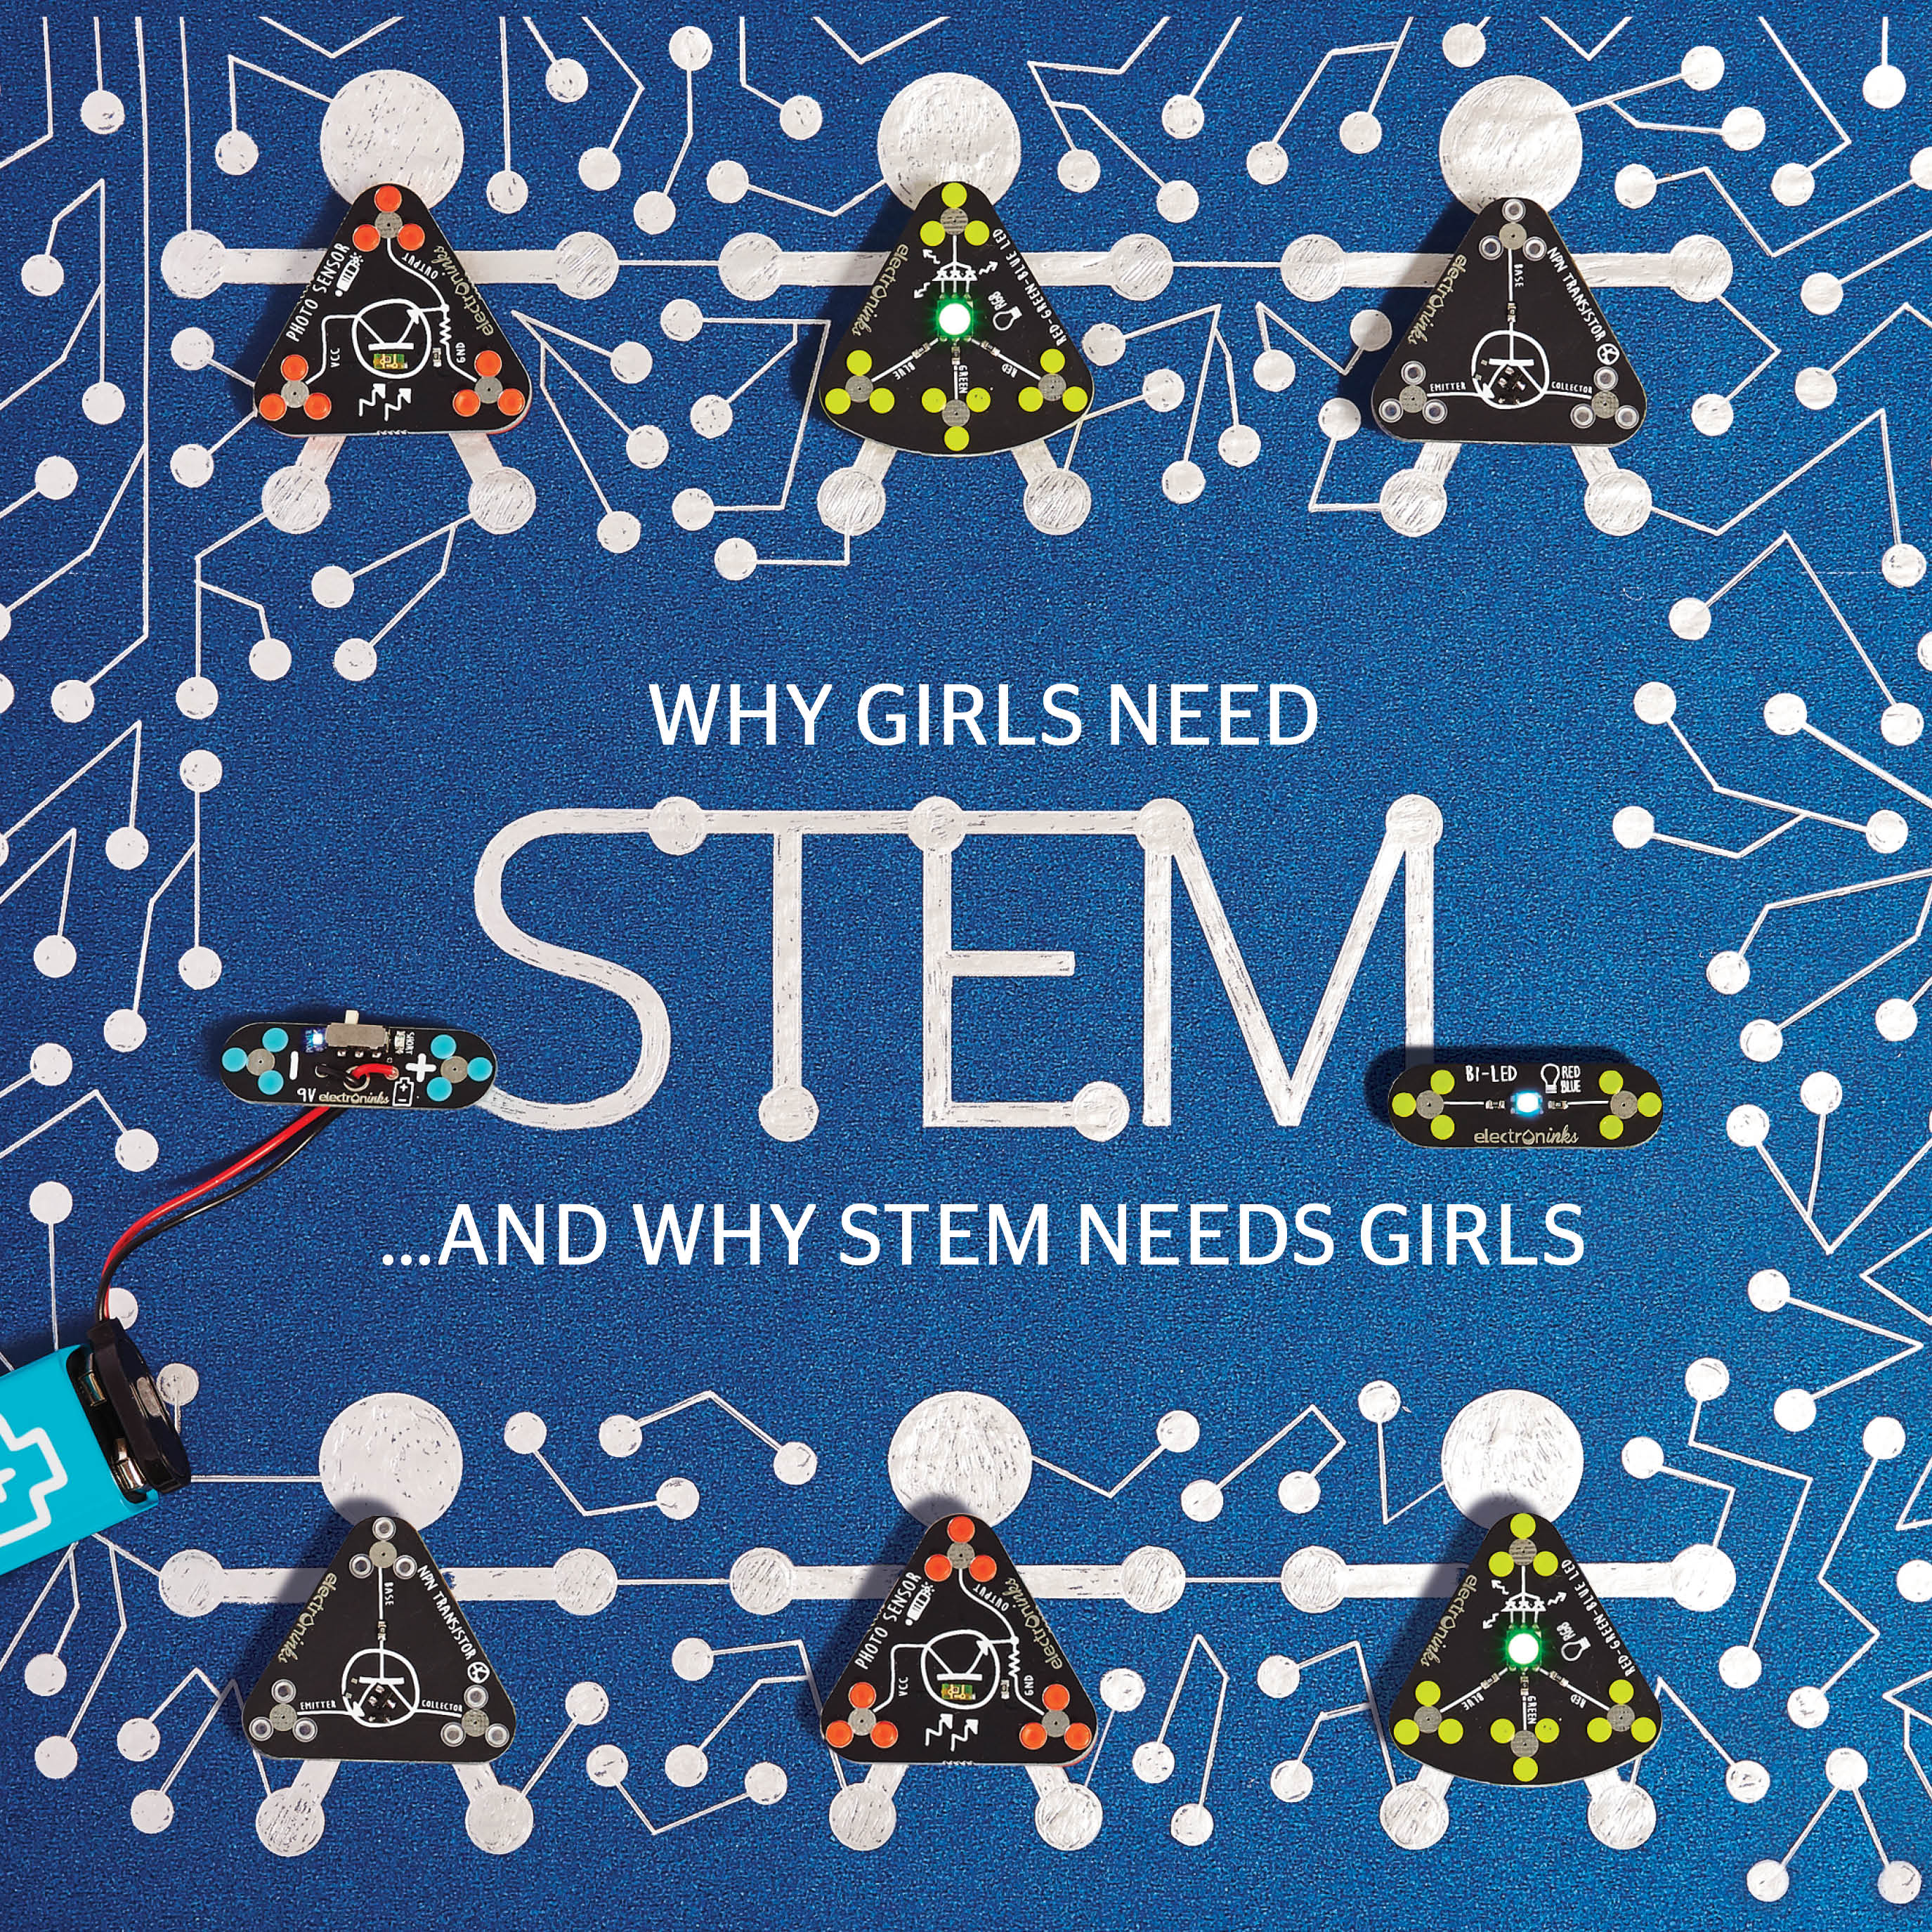 Why girls need STEM and why STEM needs girls